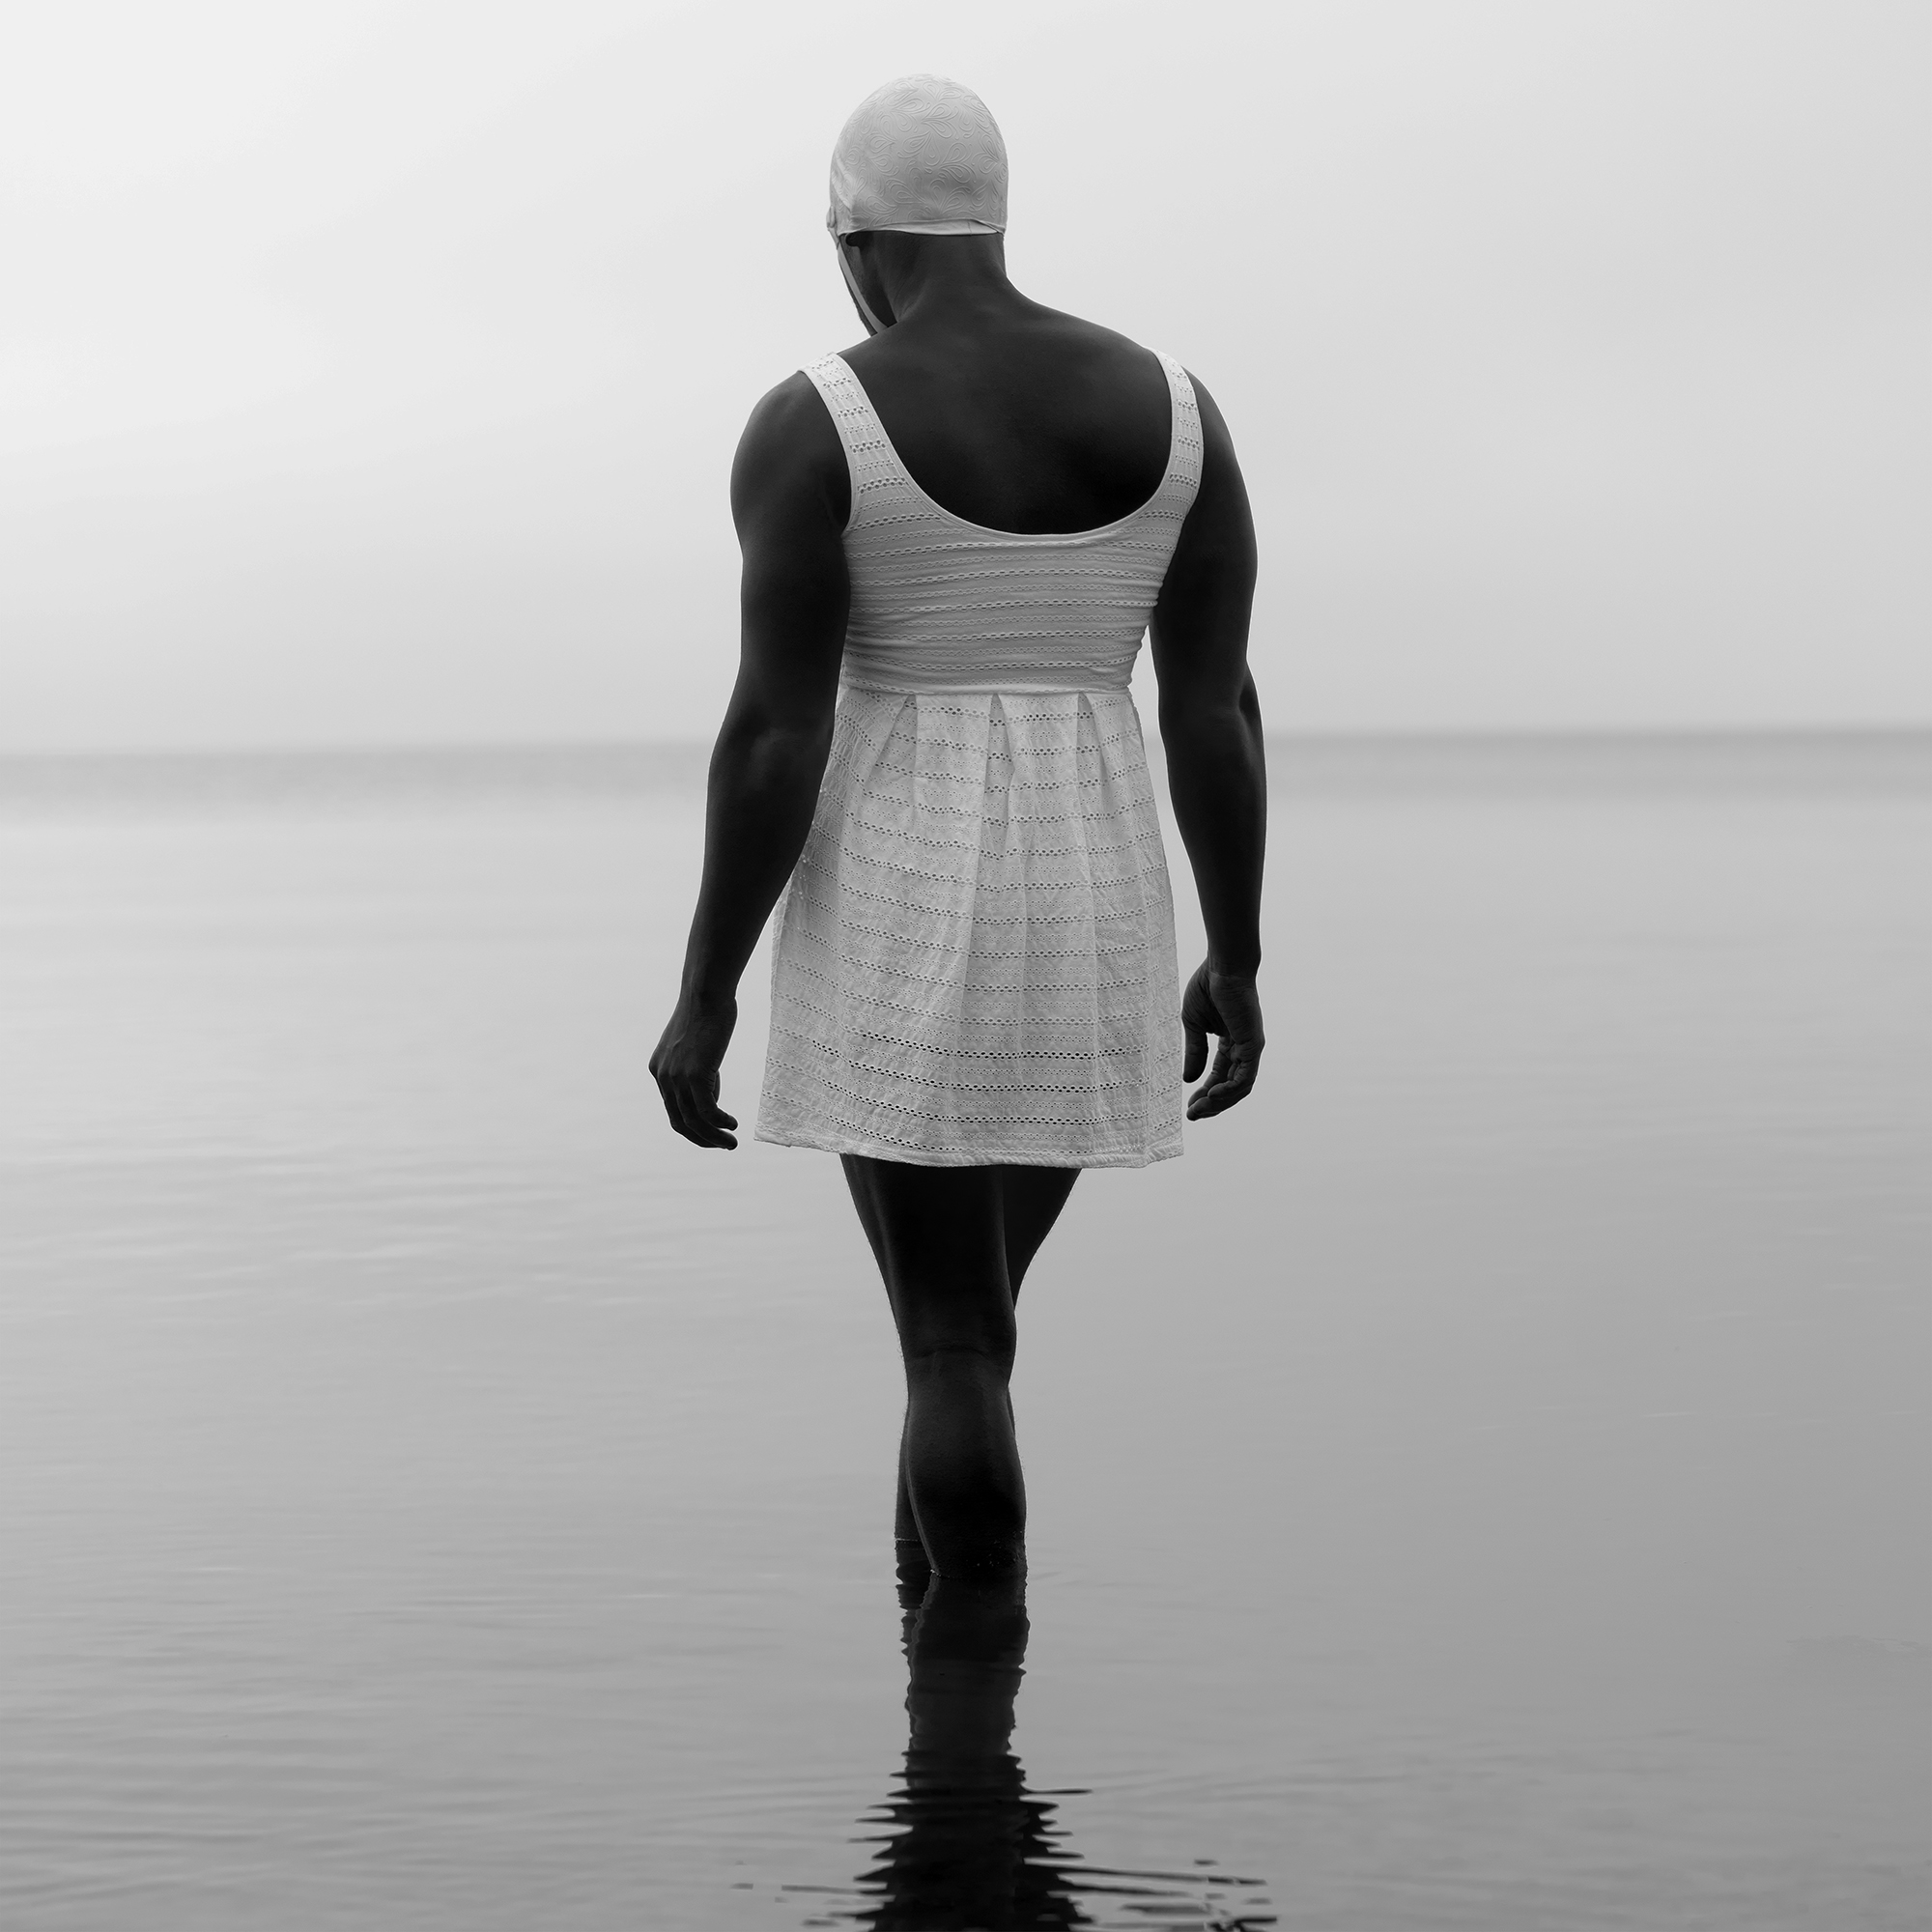 A man in a white ladies' swimsuit wades into a lake